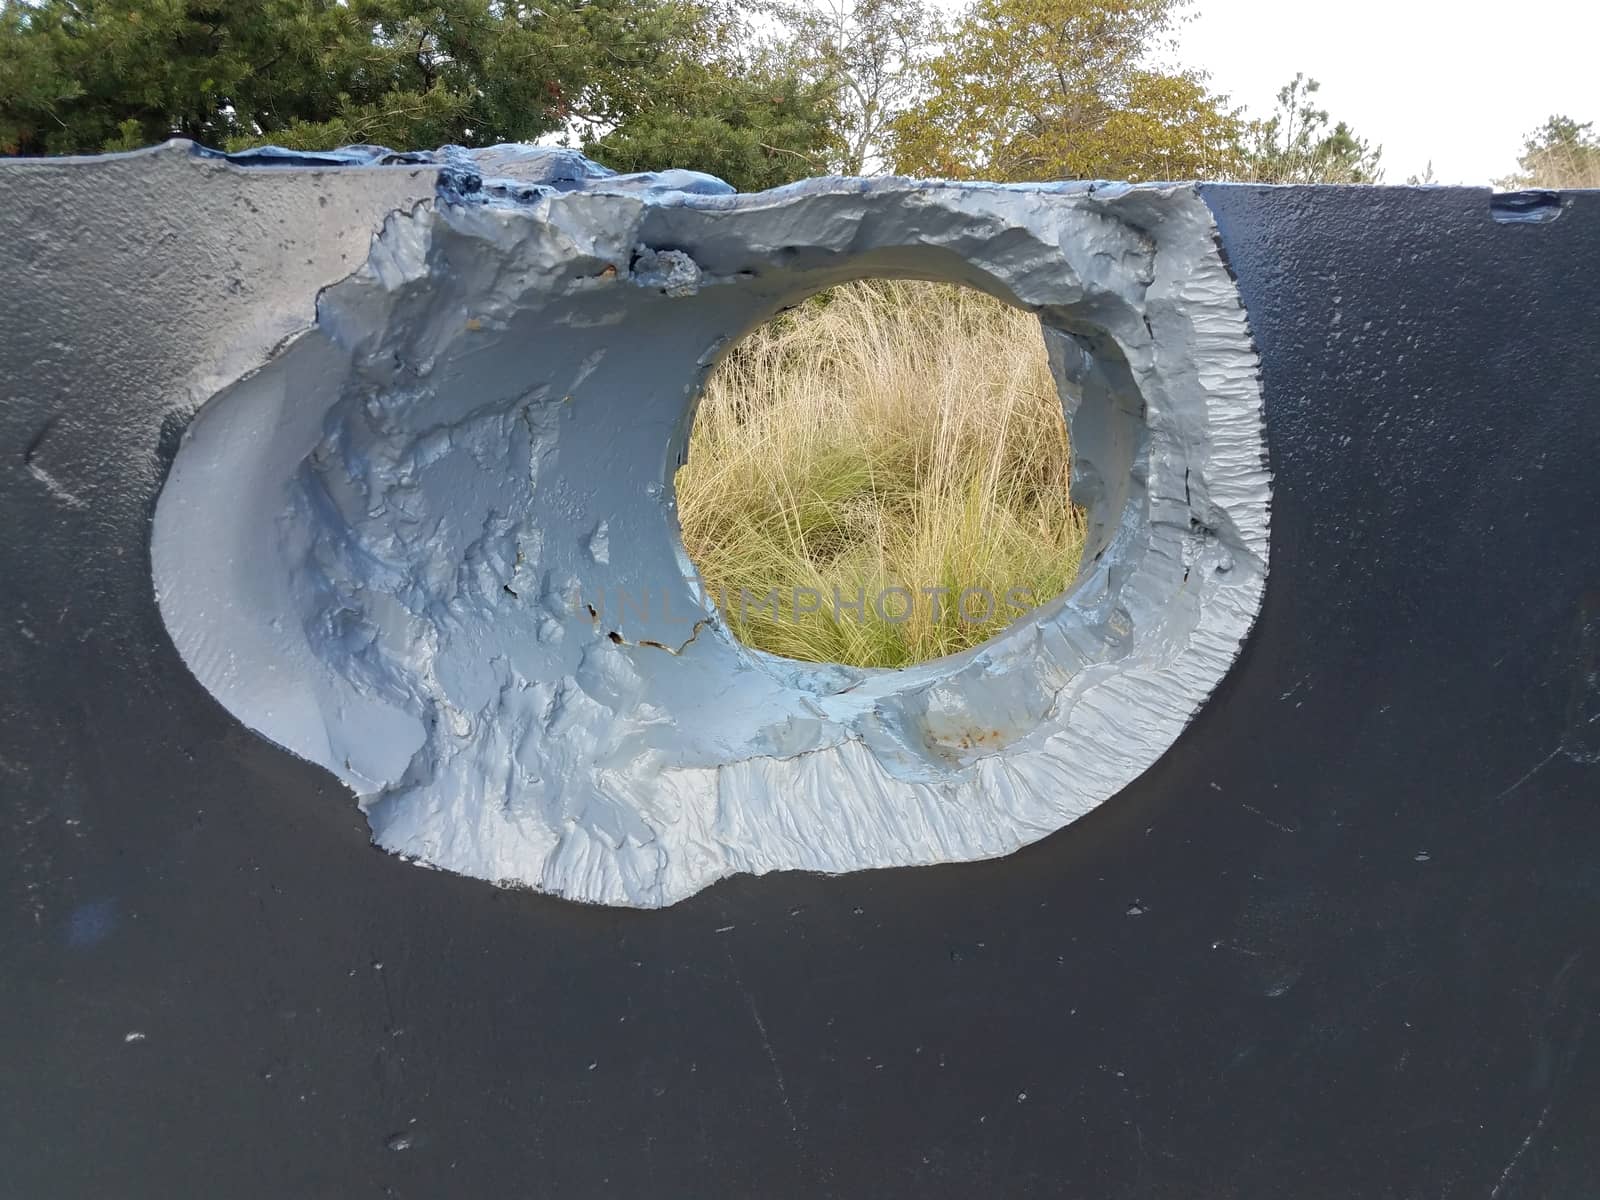 large hole or damage in metal wall outdoor by stockphotofan1